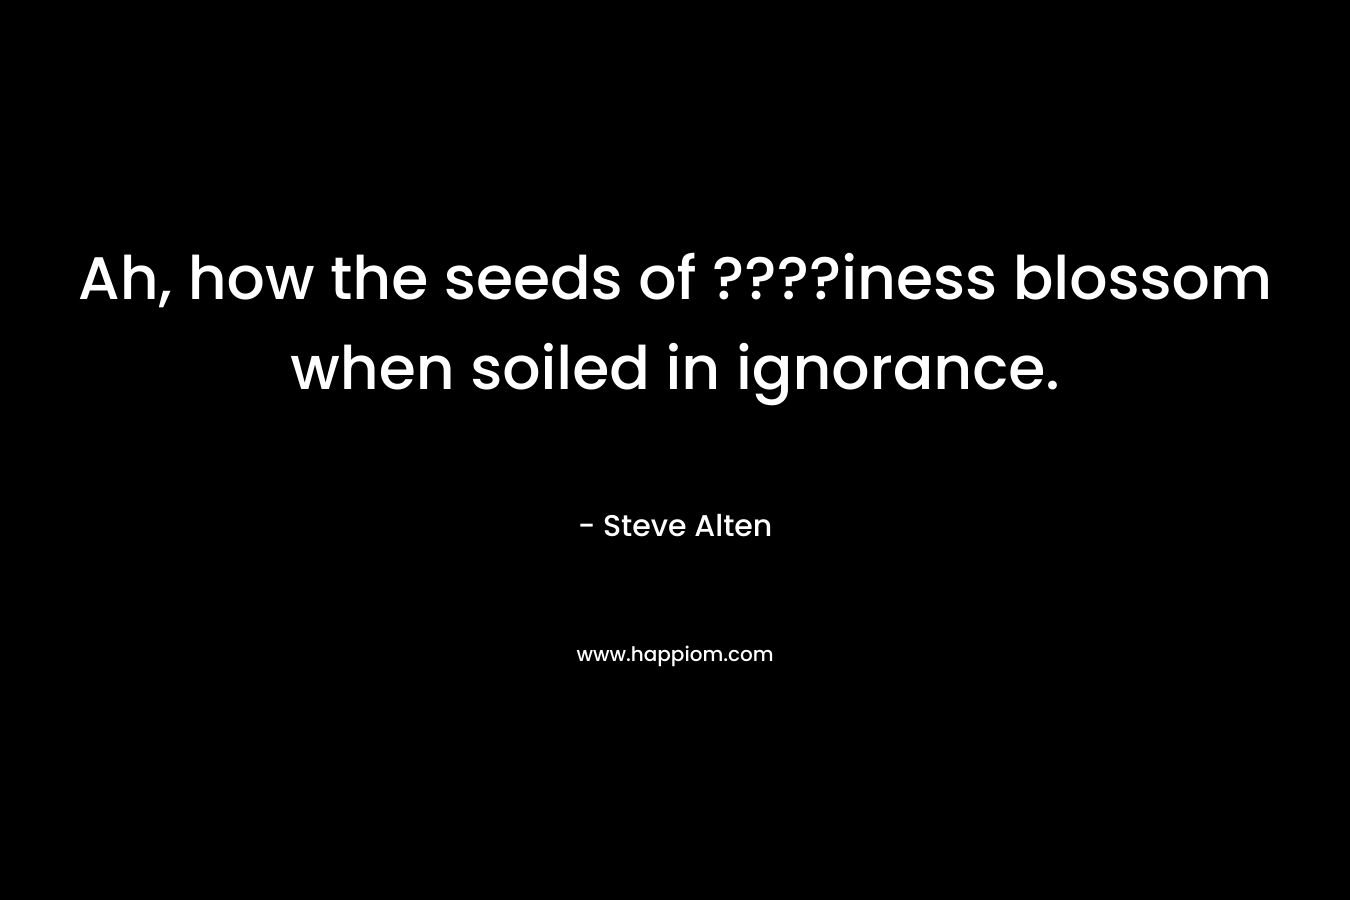 Ah, how the seeds of ????iness blossom when soiled in ignorance.